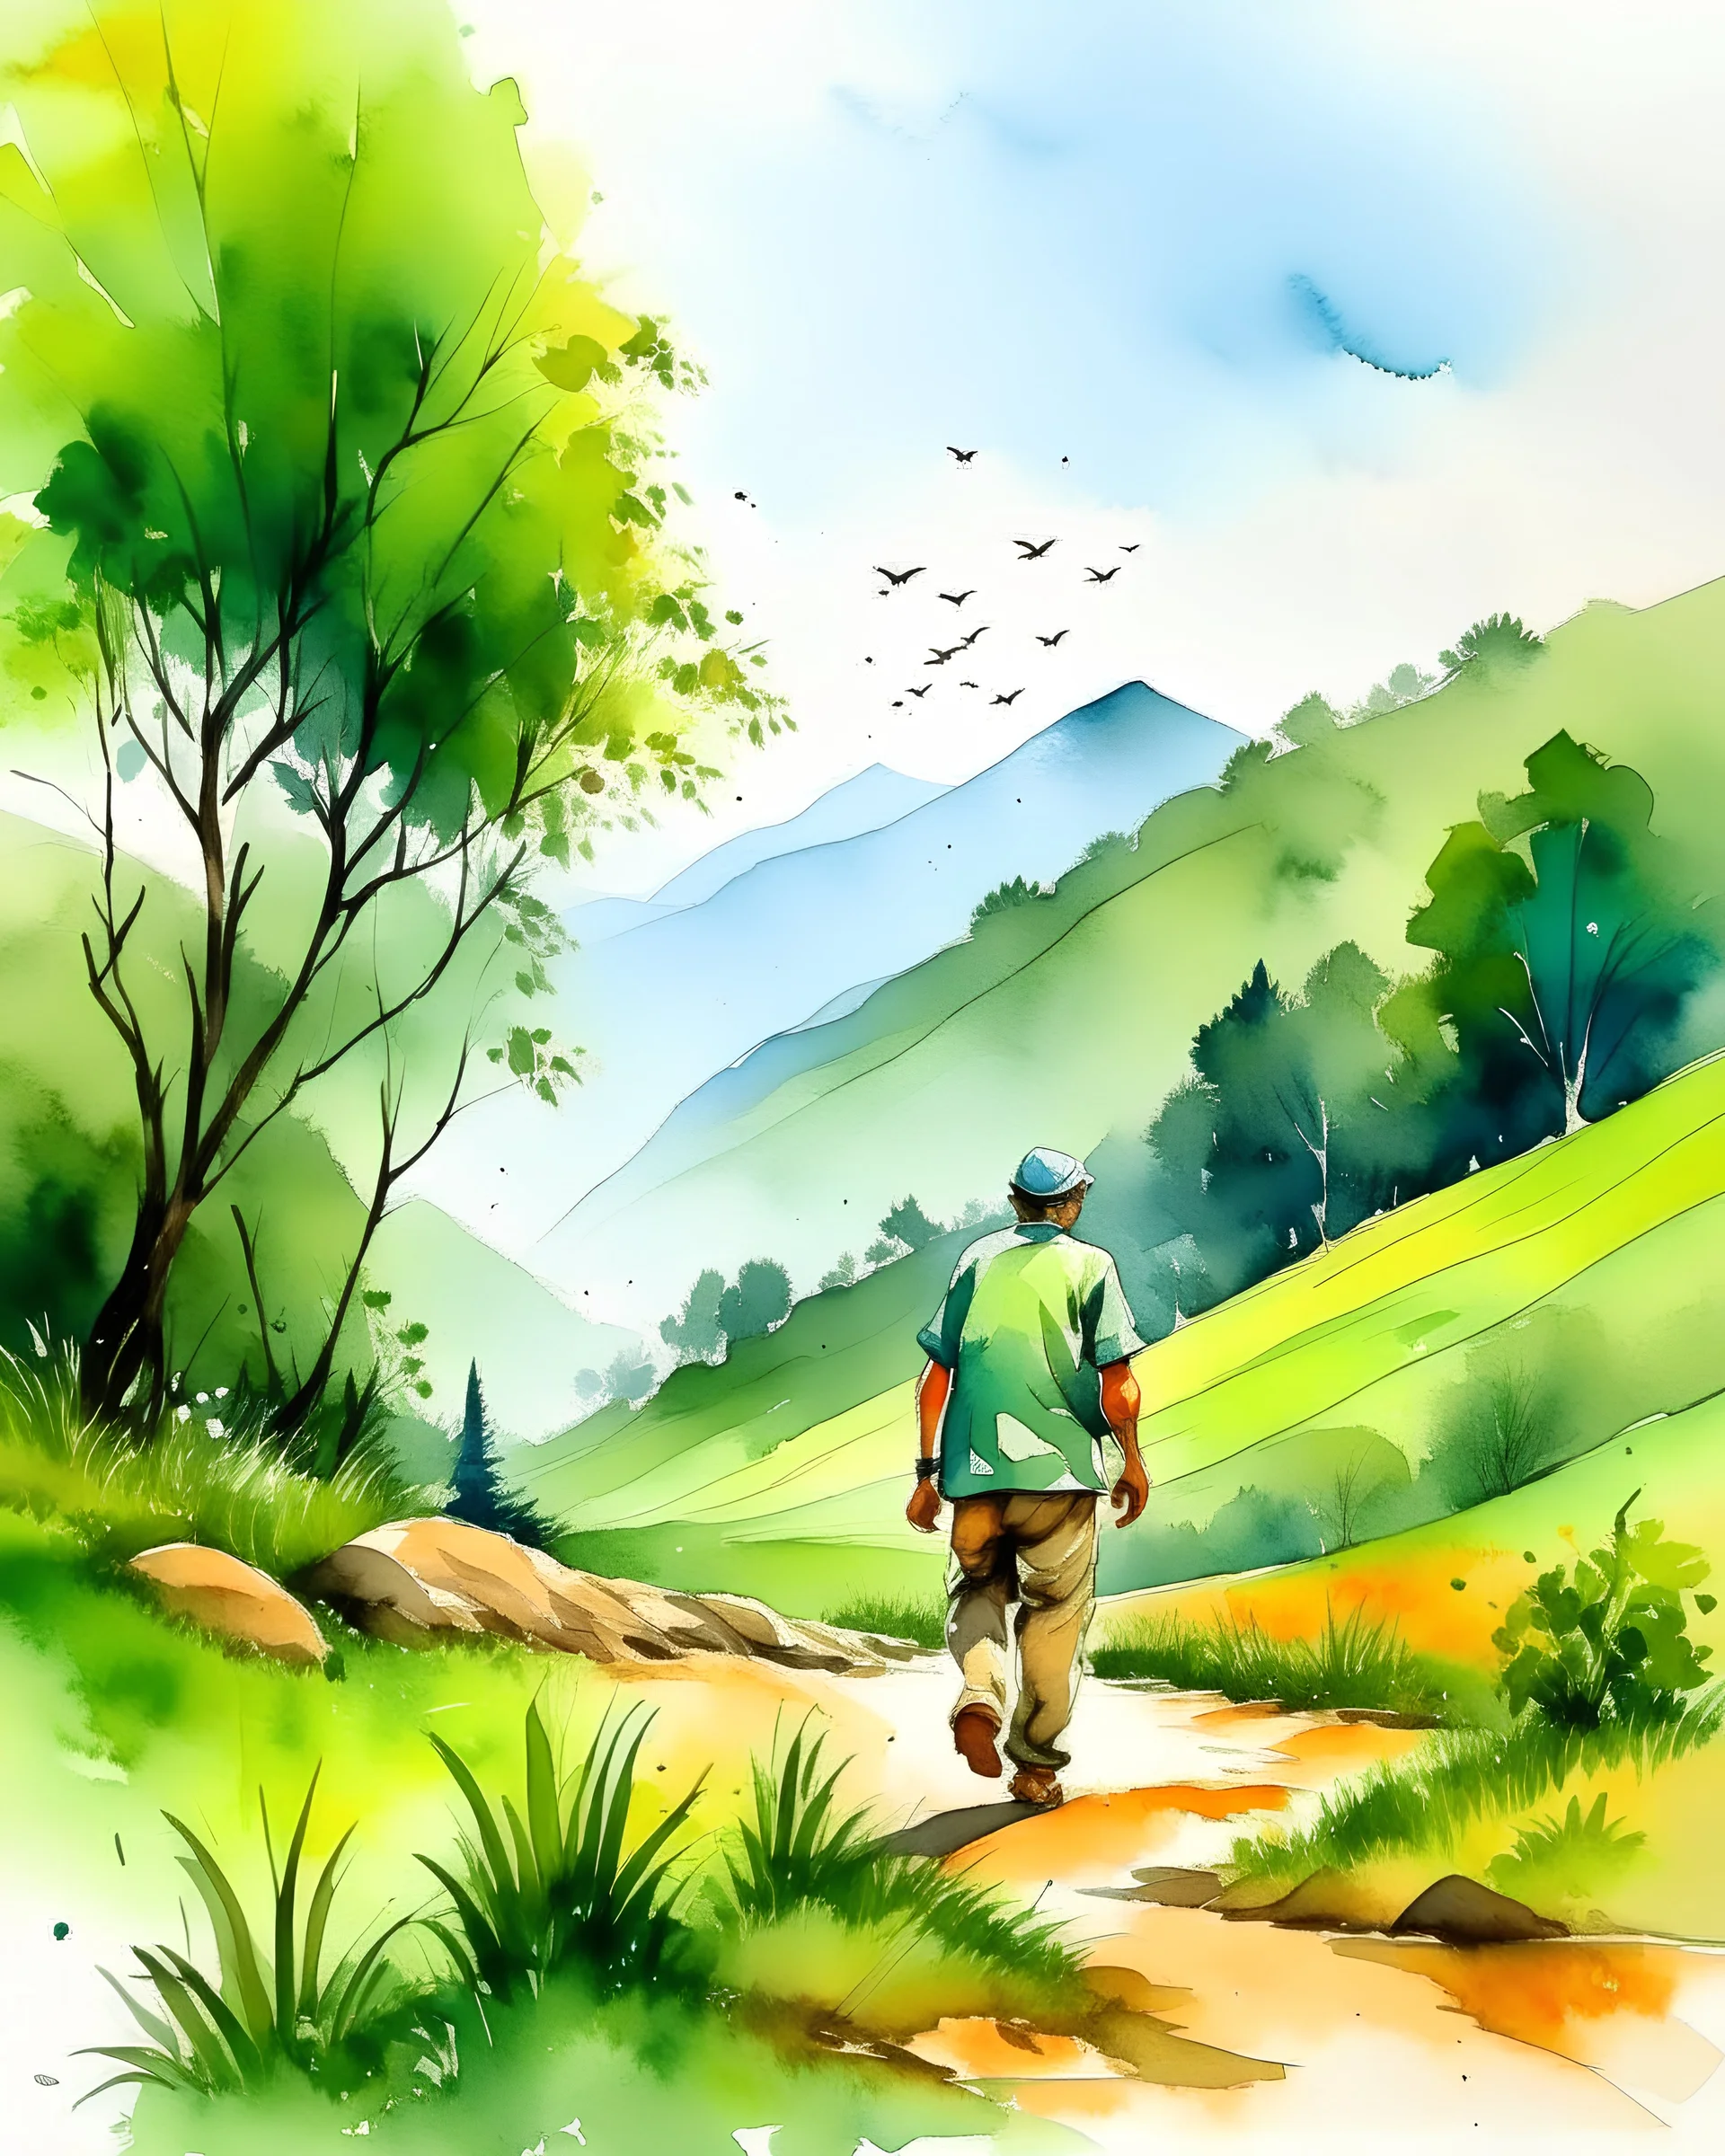 middle aged man walking alone in landscape smala mountains, green trees, birds in backdrop water color